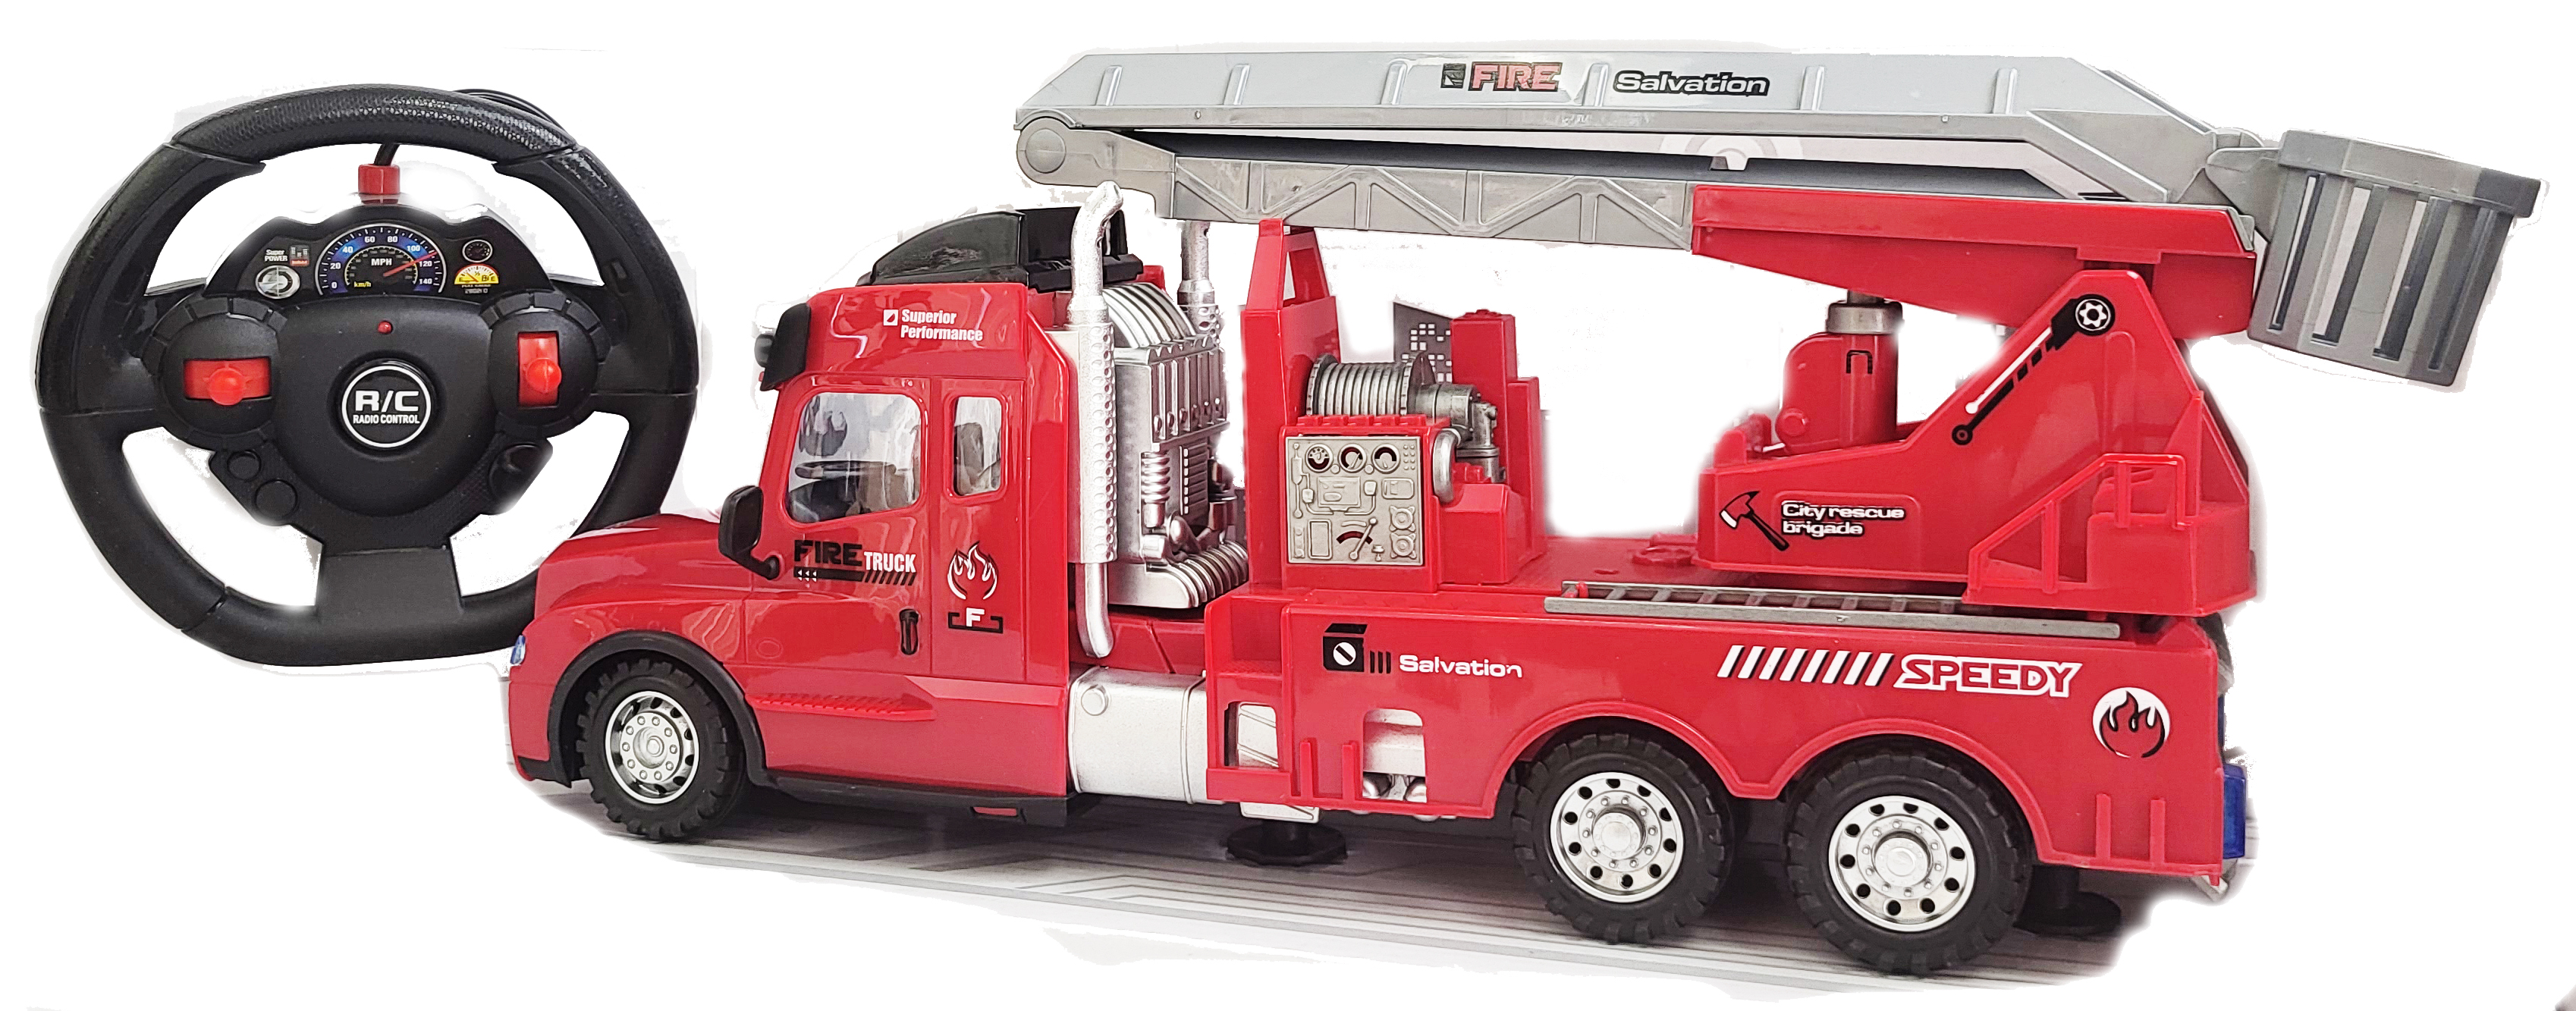 Remote Control 1:15 Scale Big Rig Truck featuring Rotating Crane